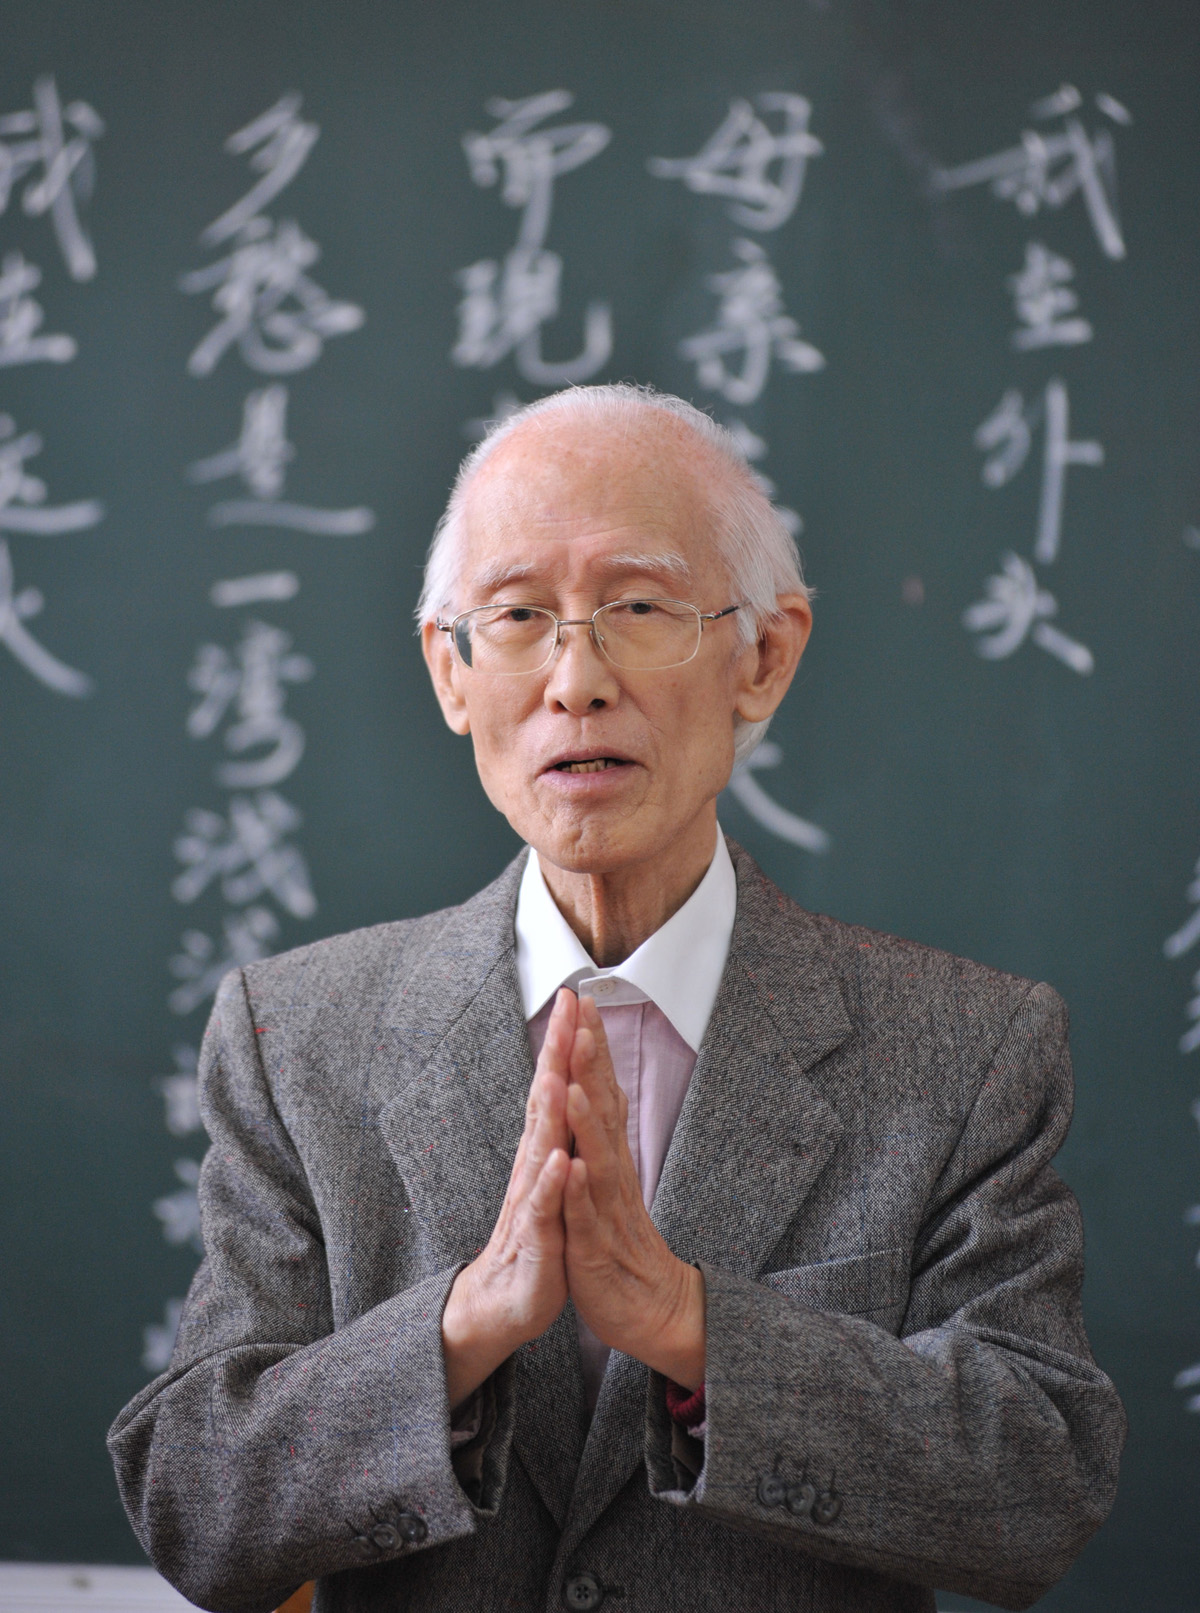 --FILE--Yu Kwang-chung (Yu Guangzhong), Taiwanese writer, poet, educator, and critic, returns to his alma mater in Nanjing city, east China's Jiangsu province, 8 October 2008. Yu Kwang-chung (Yu Guangzhong), Taiwanese writer, poet, educator, and critic died of an illness at 90, 14 December 2017. Born in east China's Nanjing in 1928, Yu Guangzhong is one of the best-known of modern Chinese writers, literary critics and translators. So far, this prolific writer has published 17 poetry collections and 12 prose collections. Since the 1970s, Yu Guangzhong has written a number of poems expressing Taiwan people's nostalgia for their homeland and family members on the mainland: these have deeply touched the heartstrings of numerous Chinese.